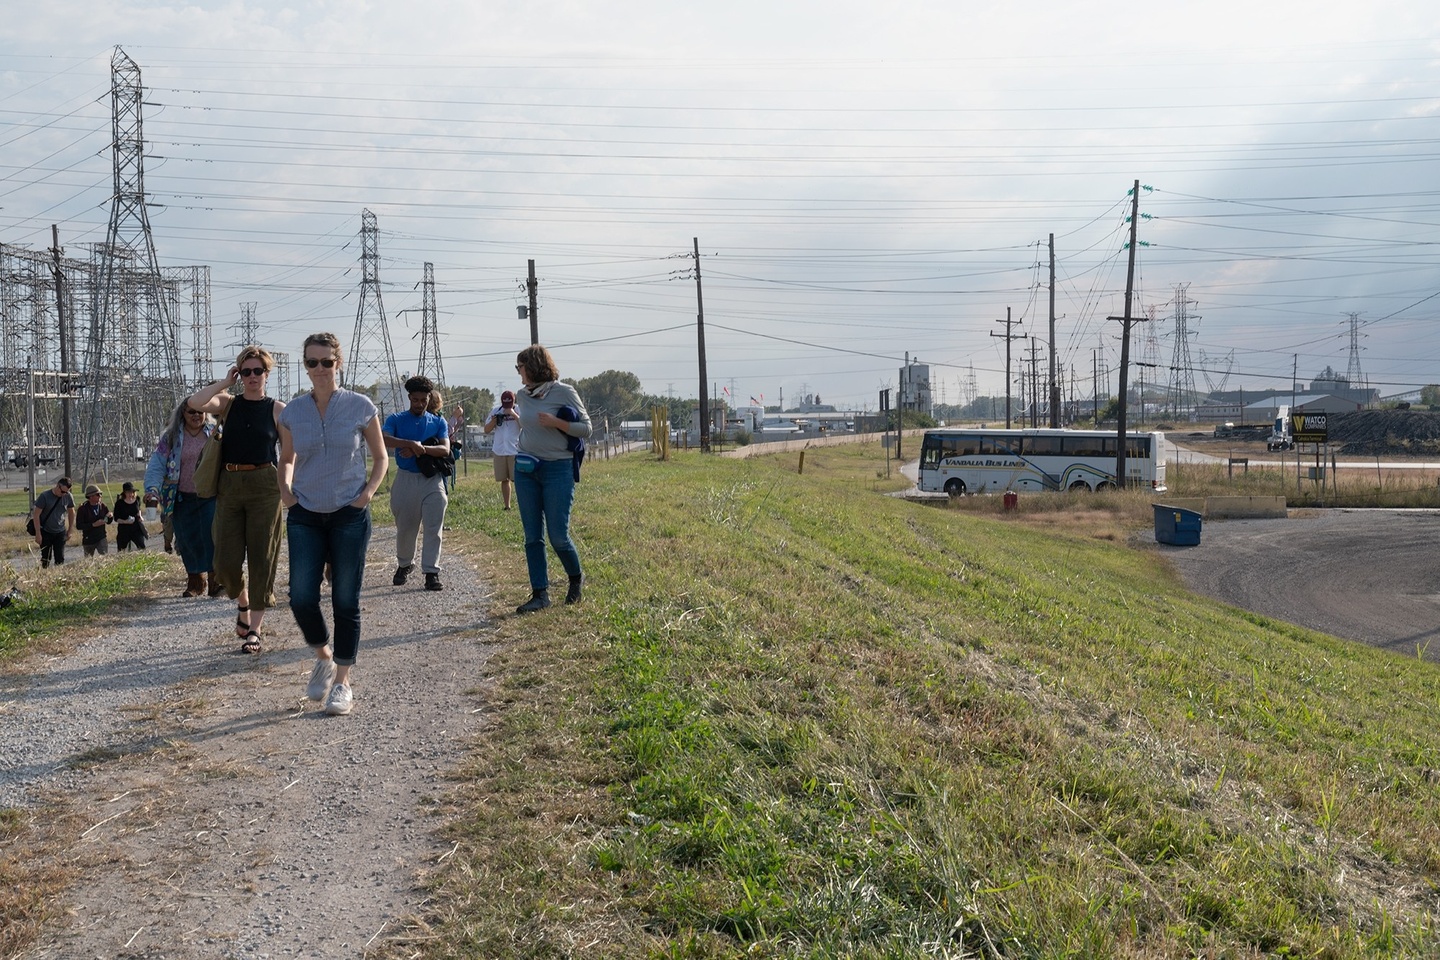 A group of students walks along an unpaved road near an electrical grid hub.